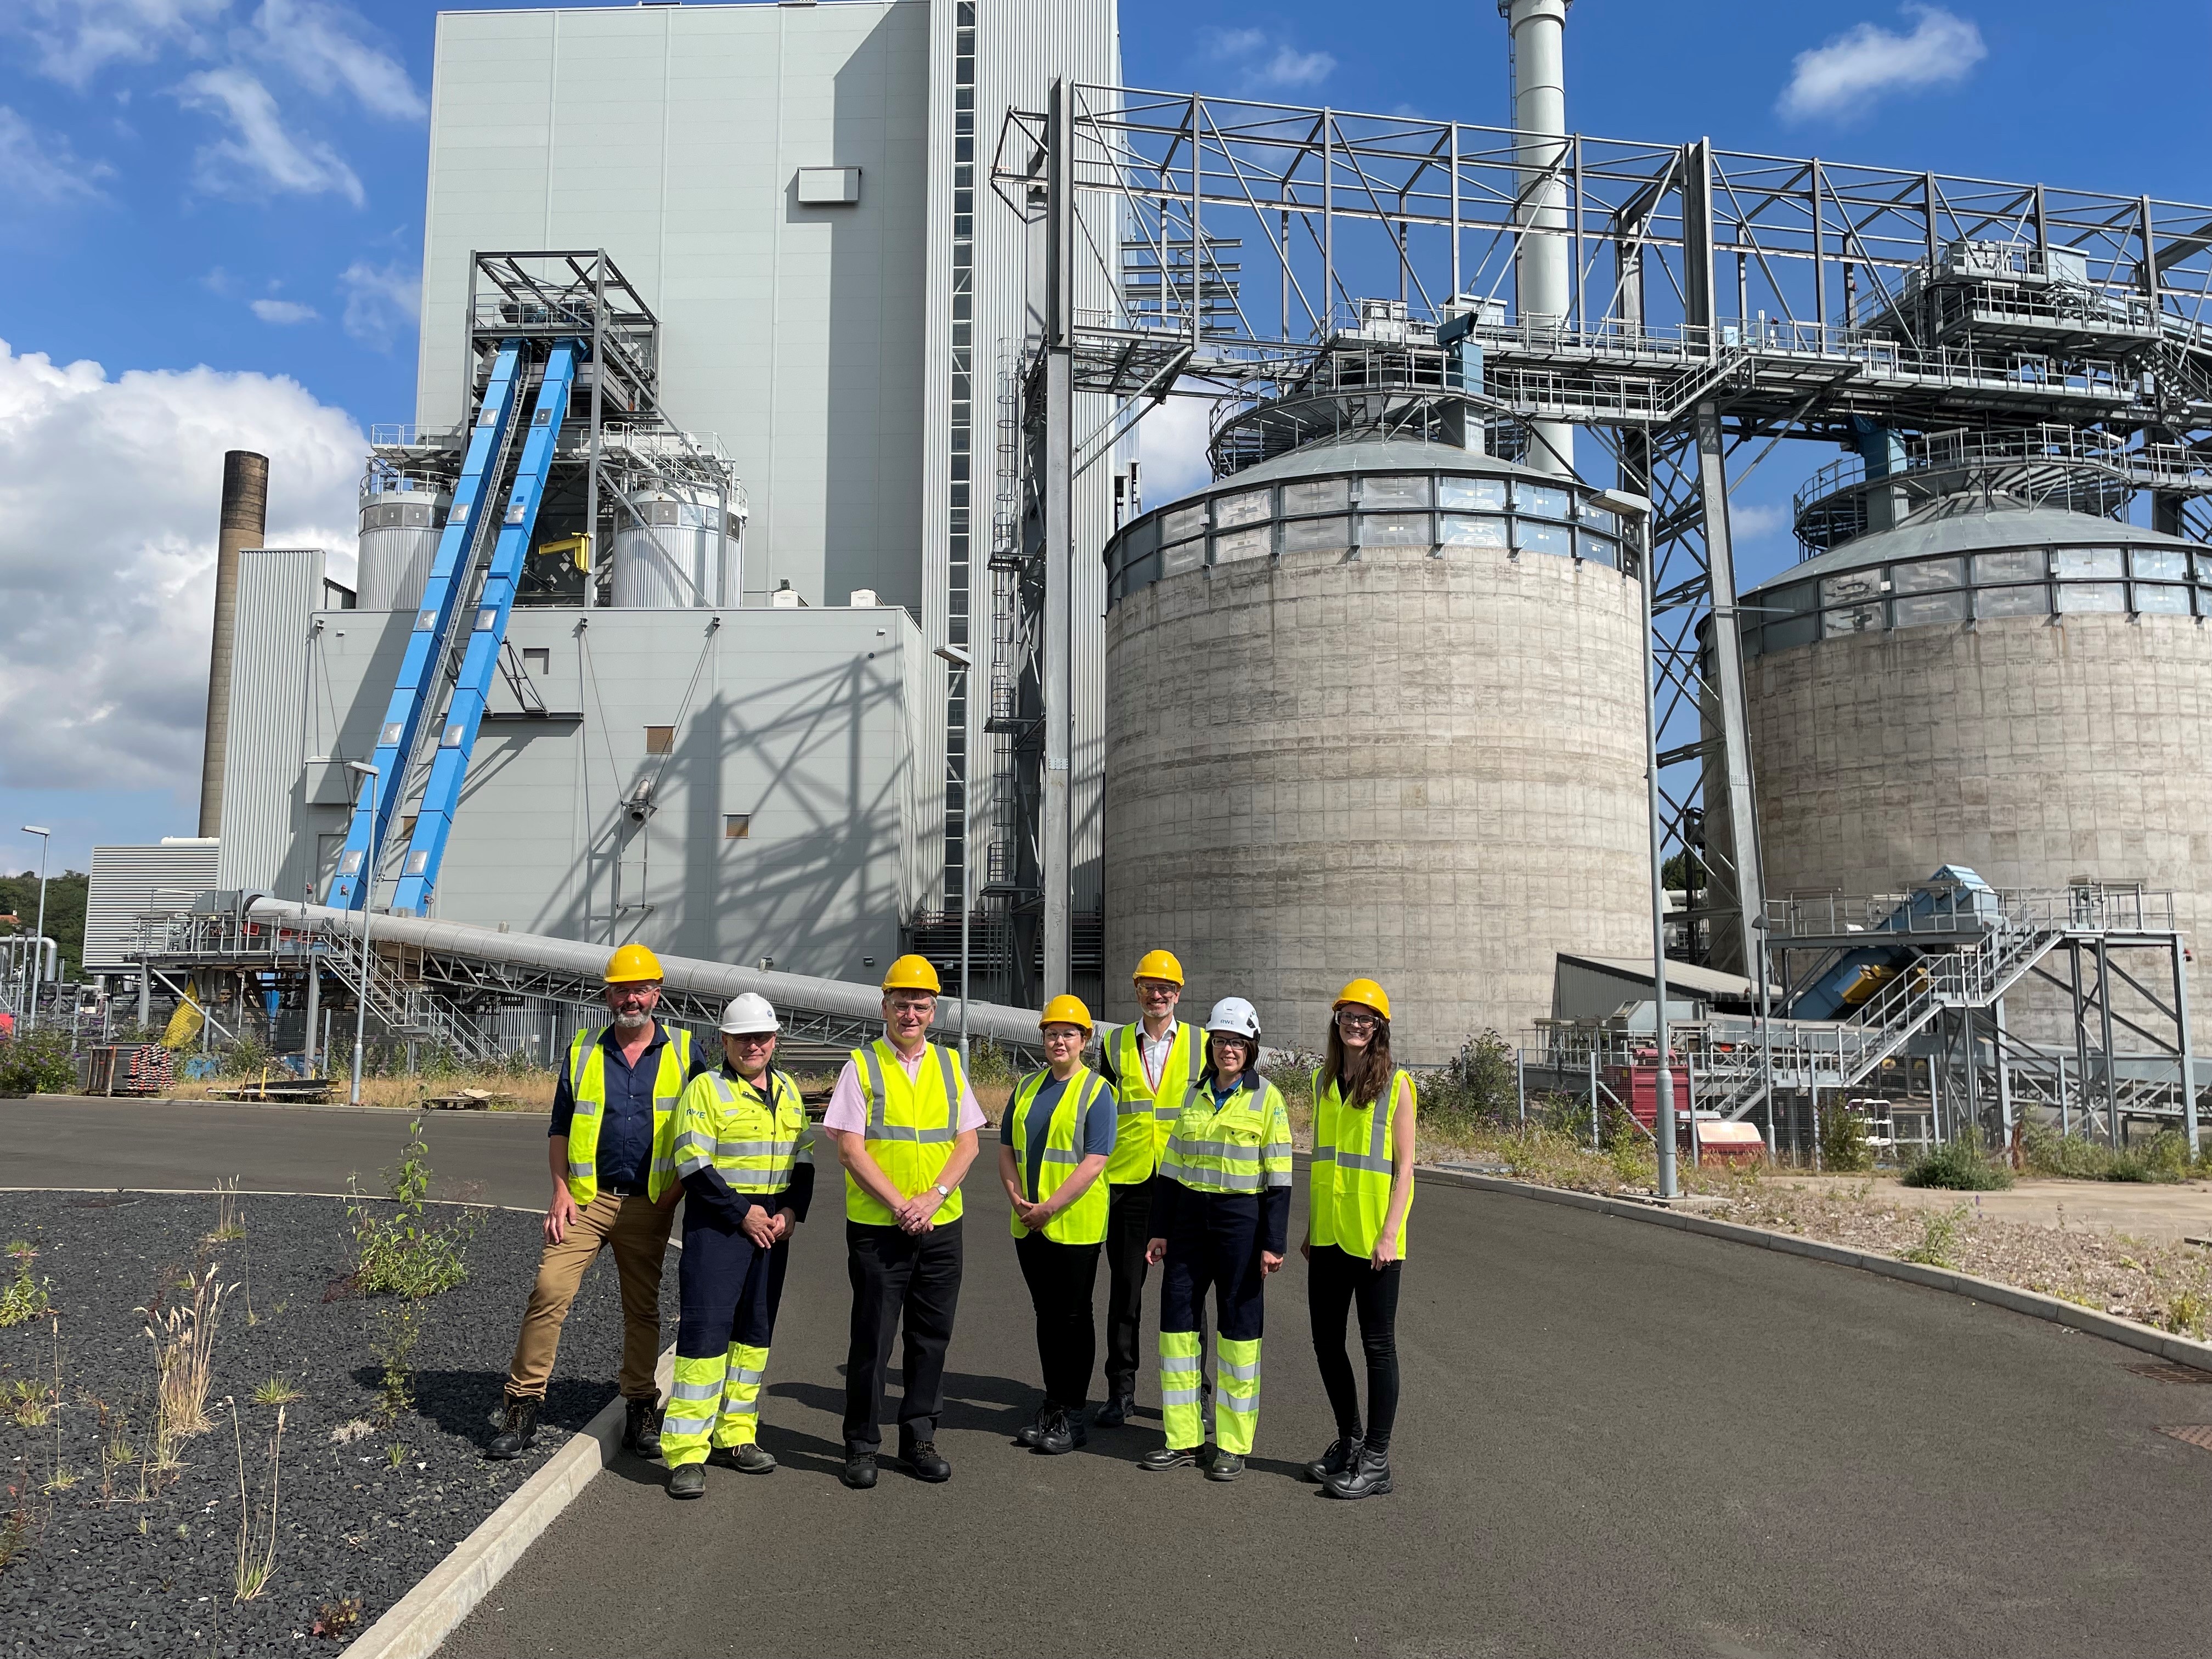 Glenrothes MP visits Markinch Biomass Power Station to understand RWE’s hydrogen  plans 